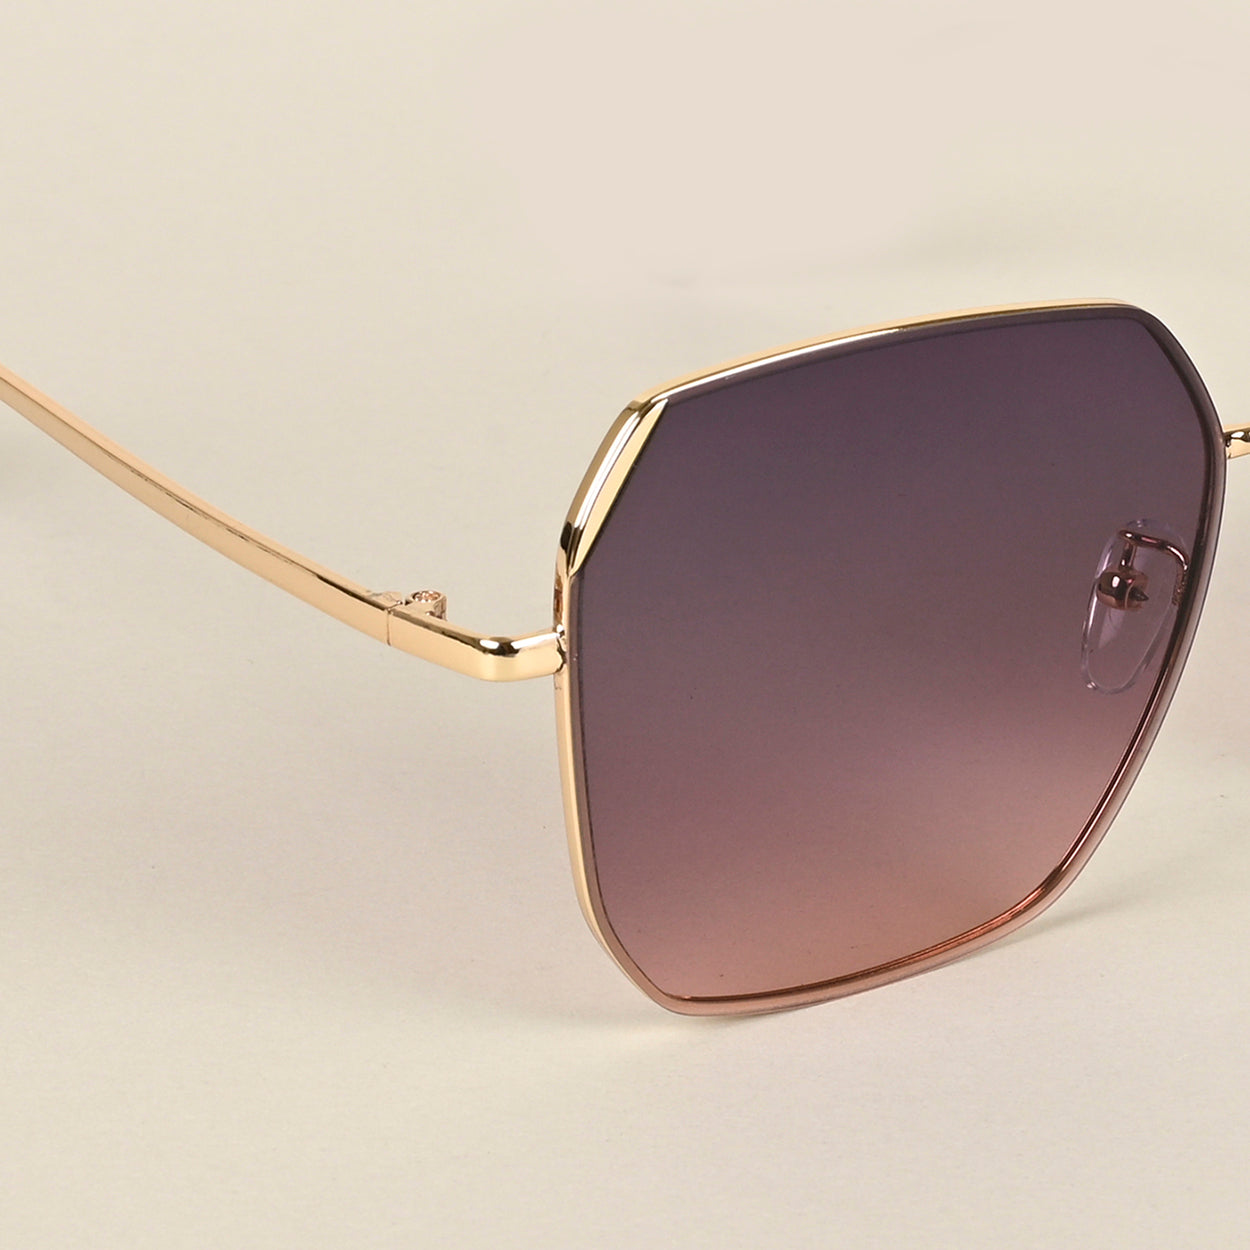 Voyage Grey & Pink Square Sunglasses for Men & Women - MG4341